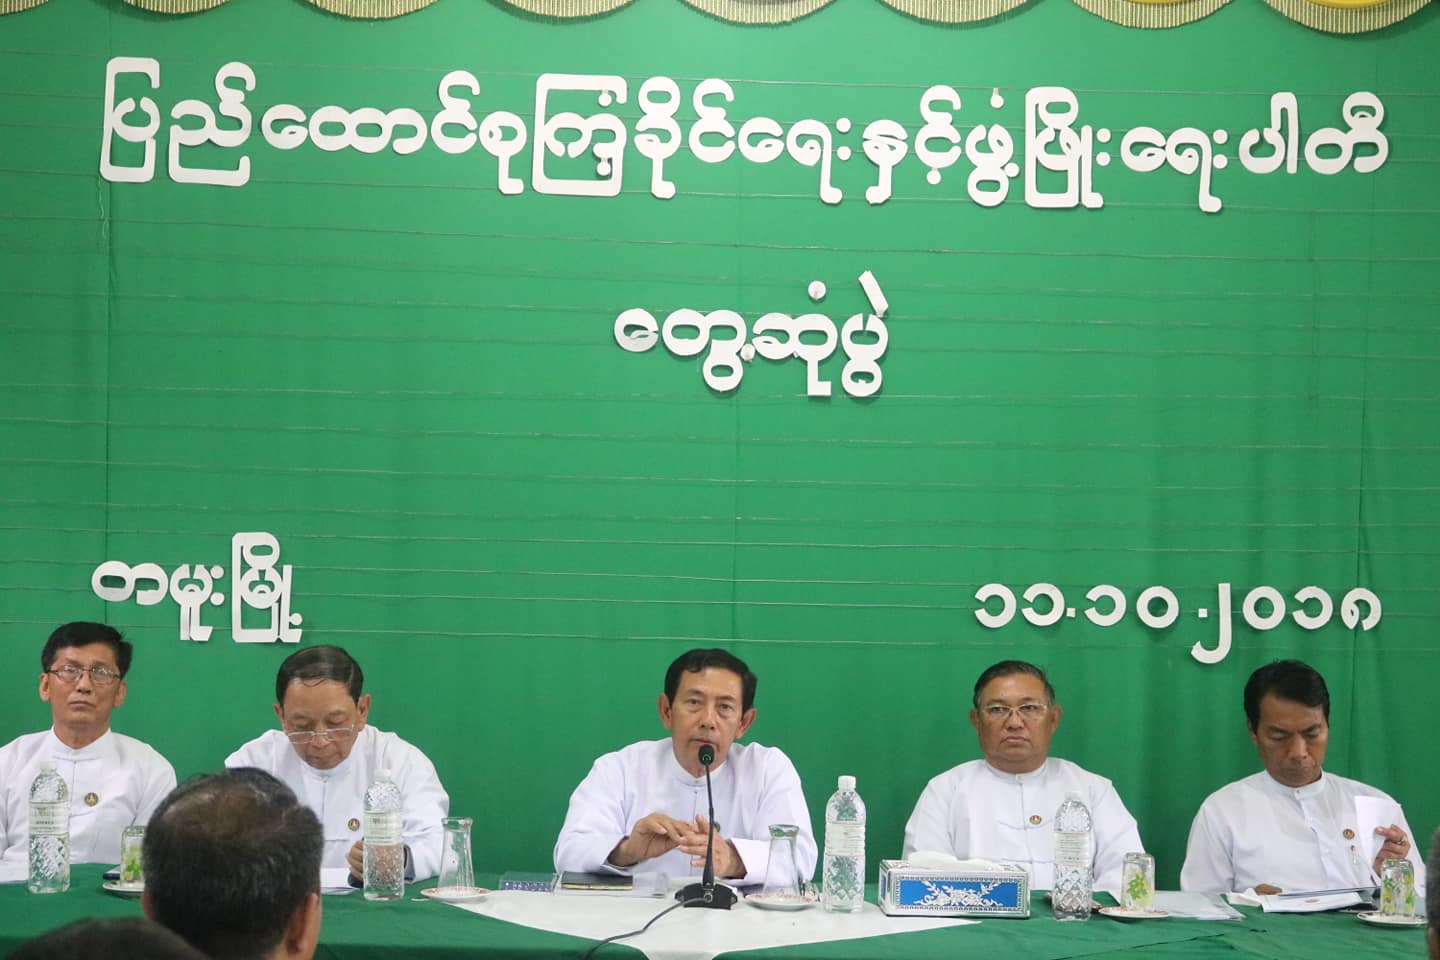 A USDP event on Oct. 11, 2018. Photo: Facebook / Union Solidarity and Development Party